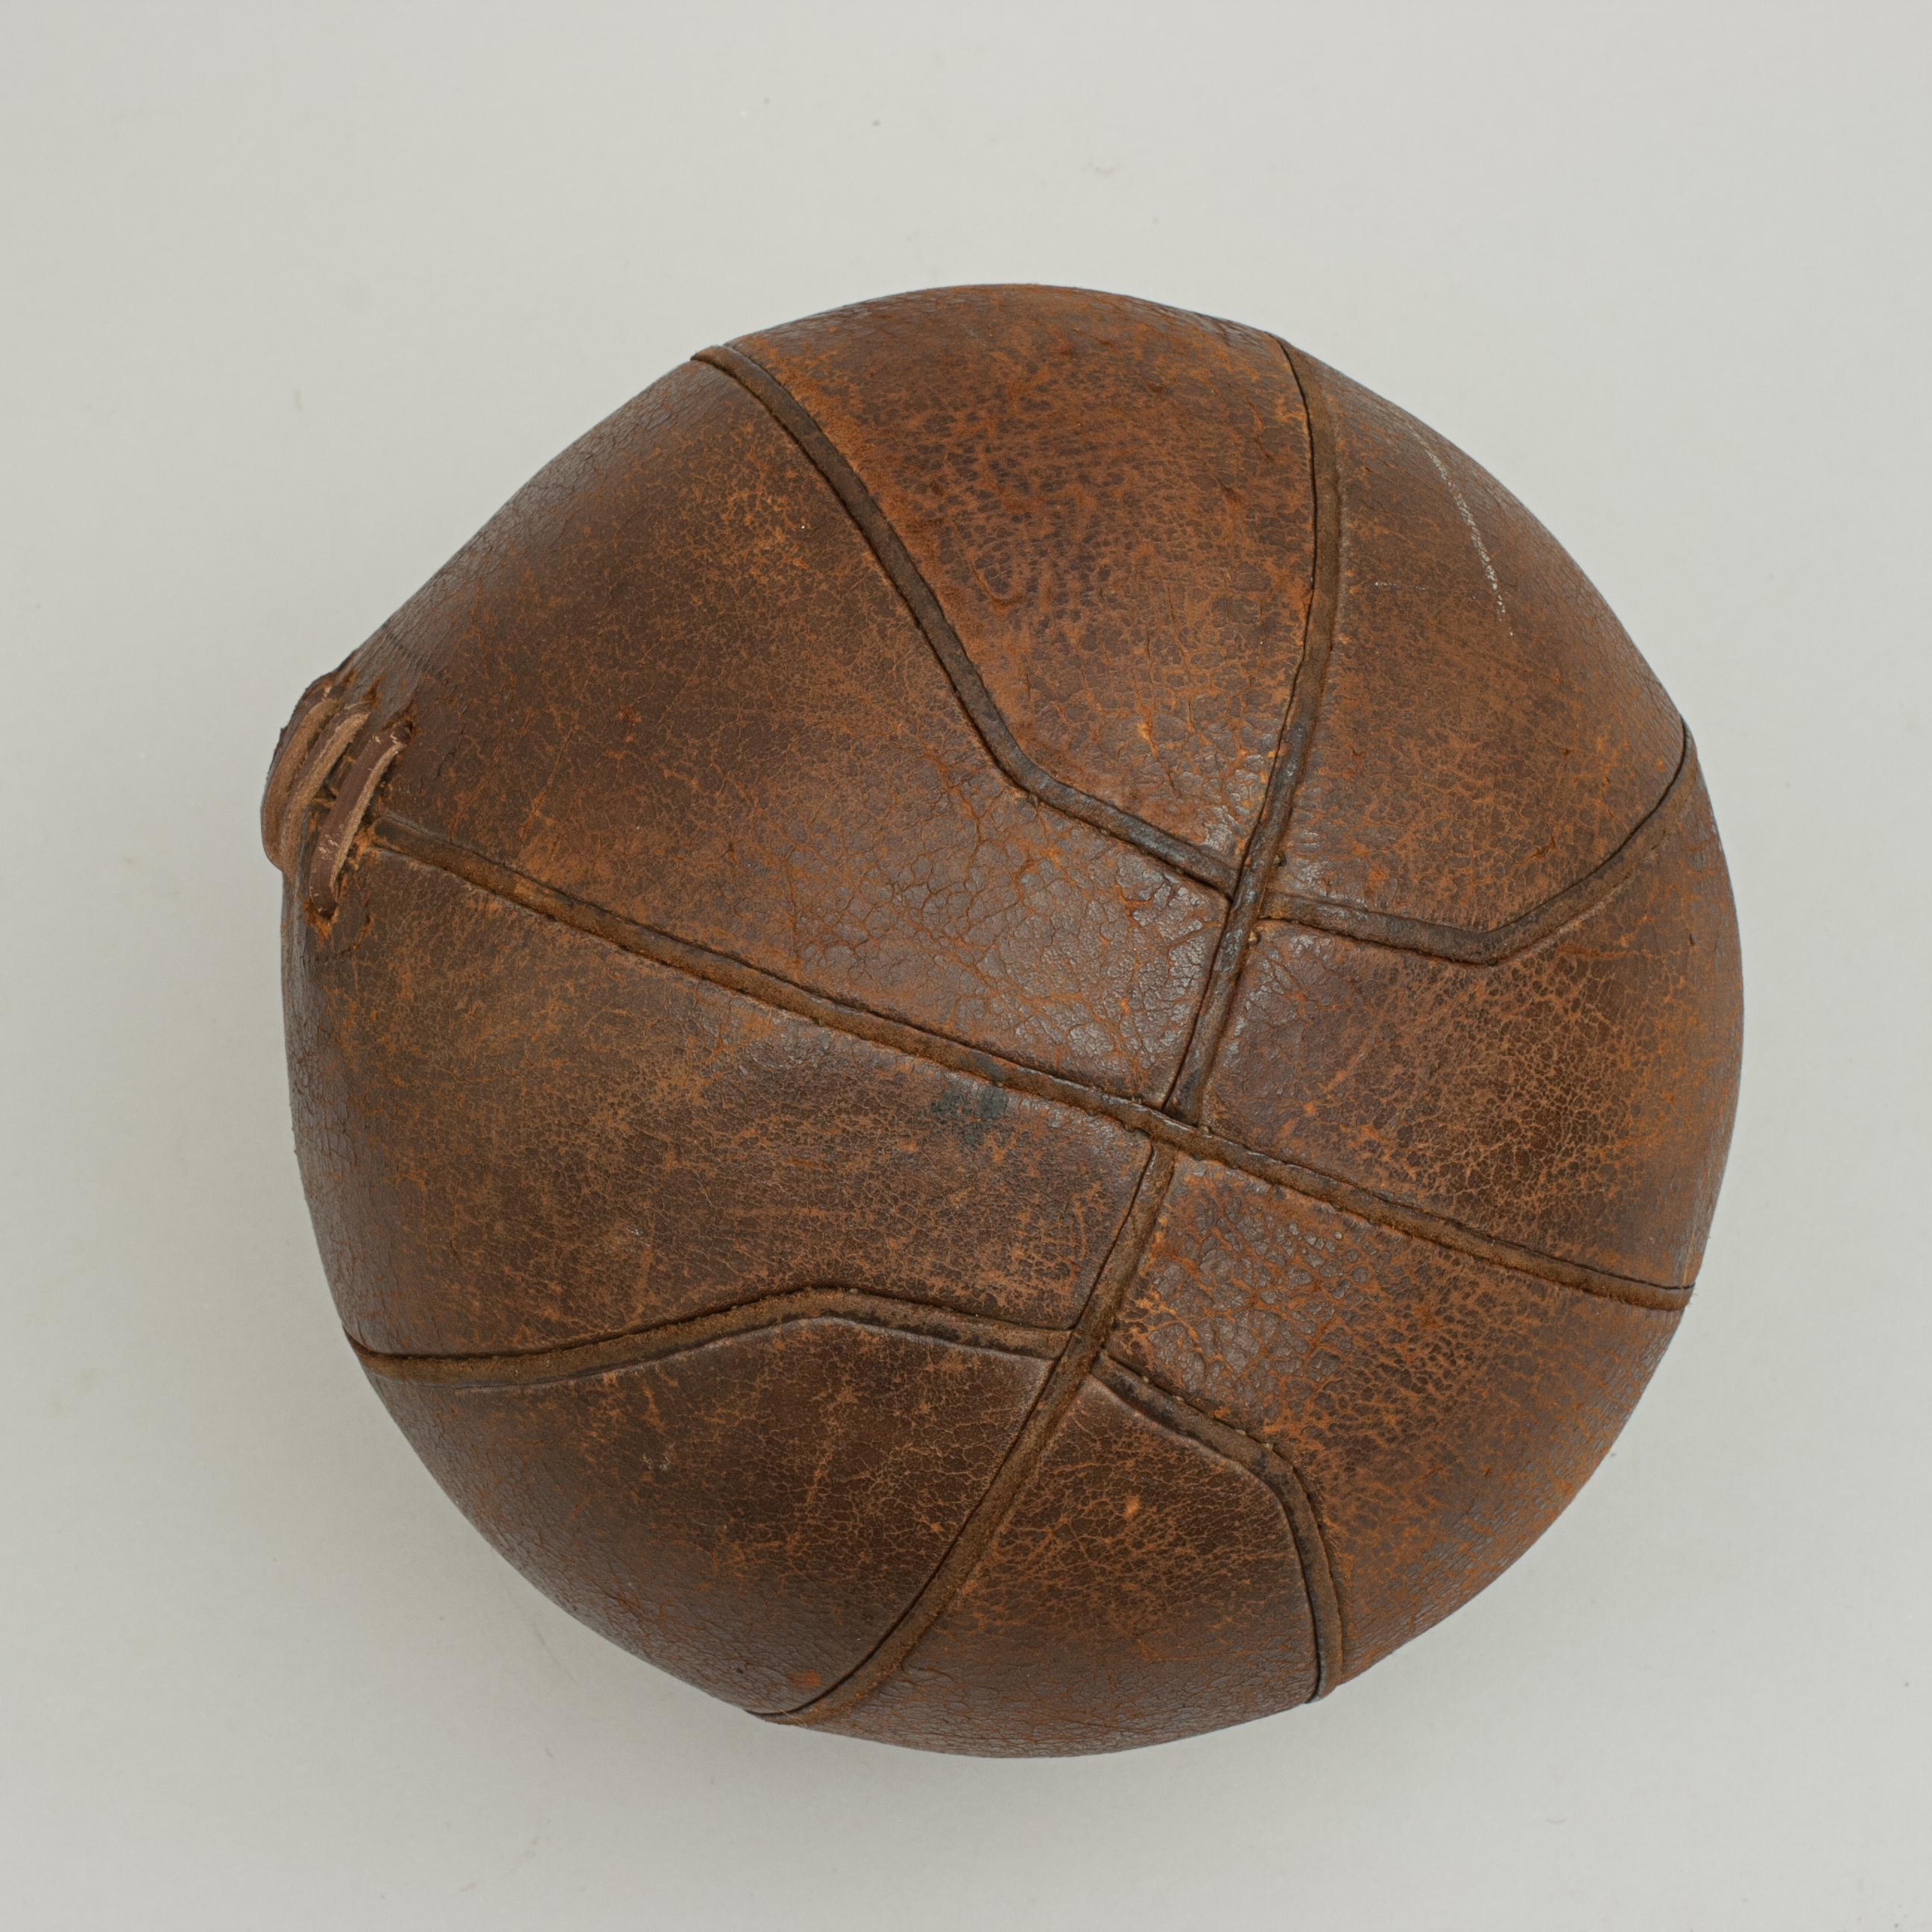 Sporting Art 19th Century Antique Leather Basketball or Netball.